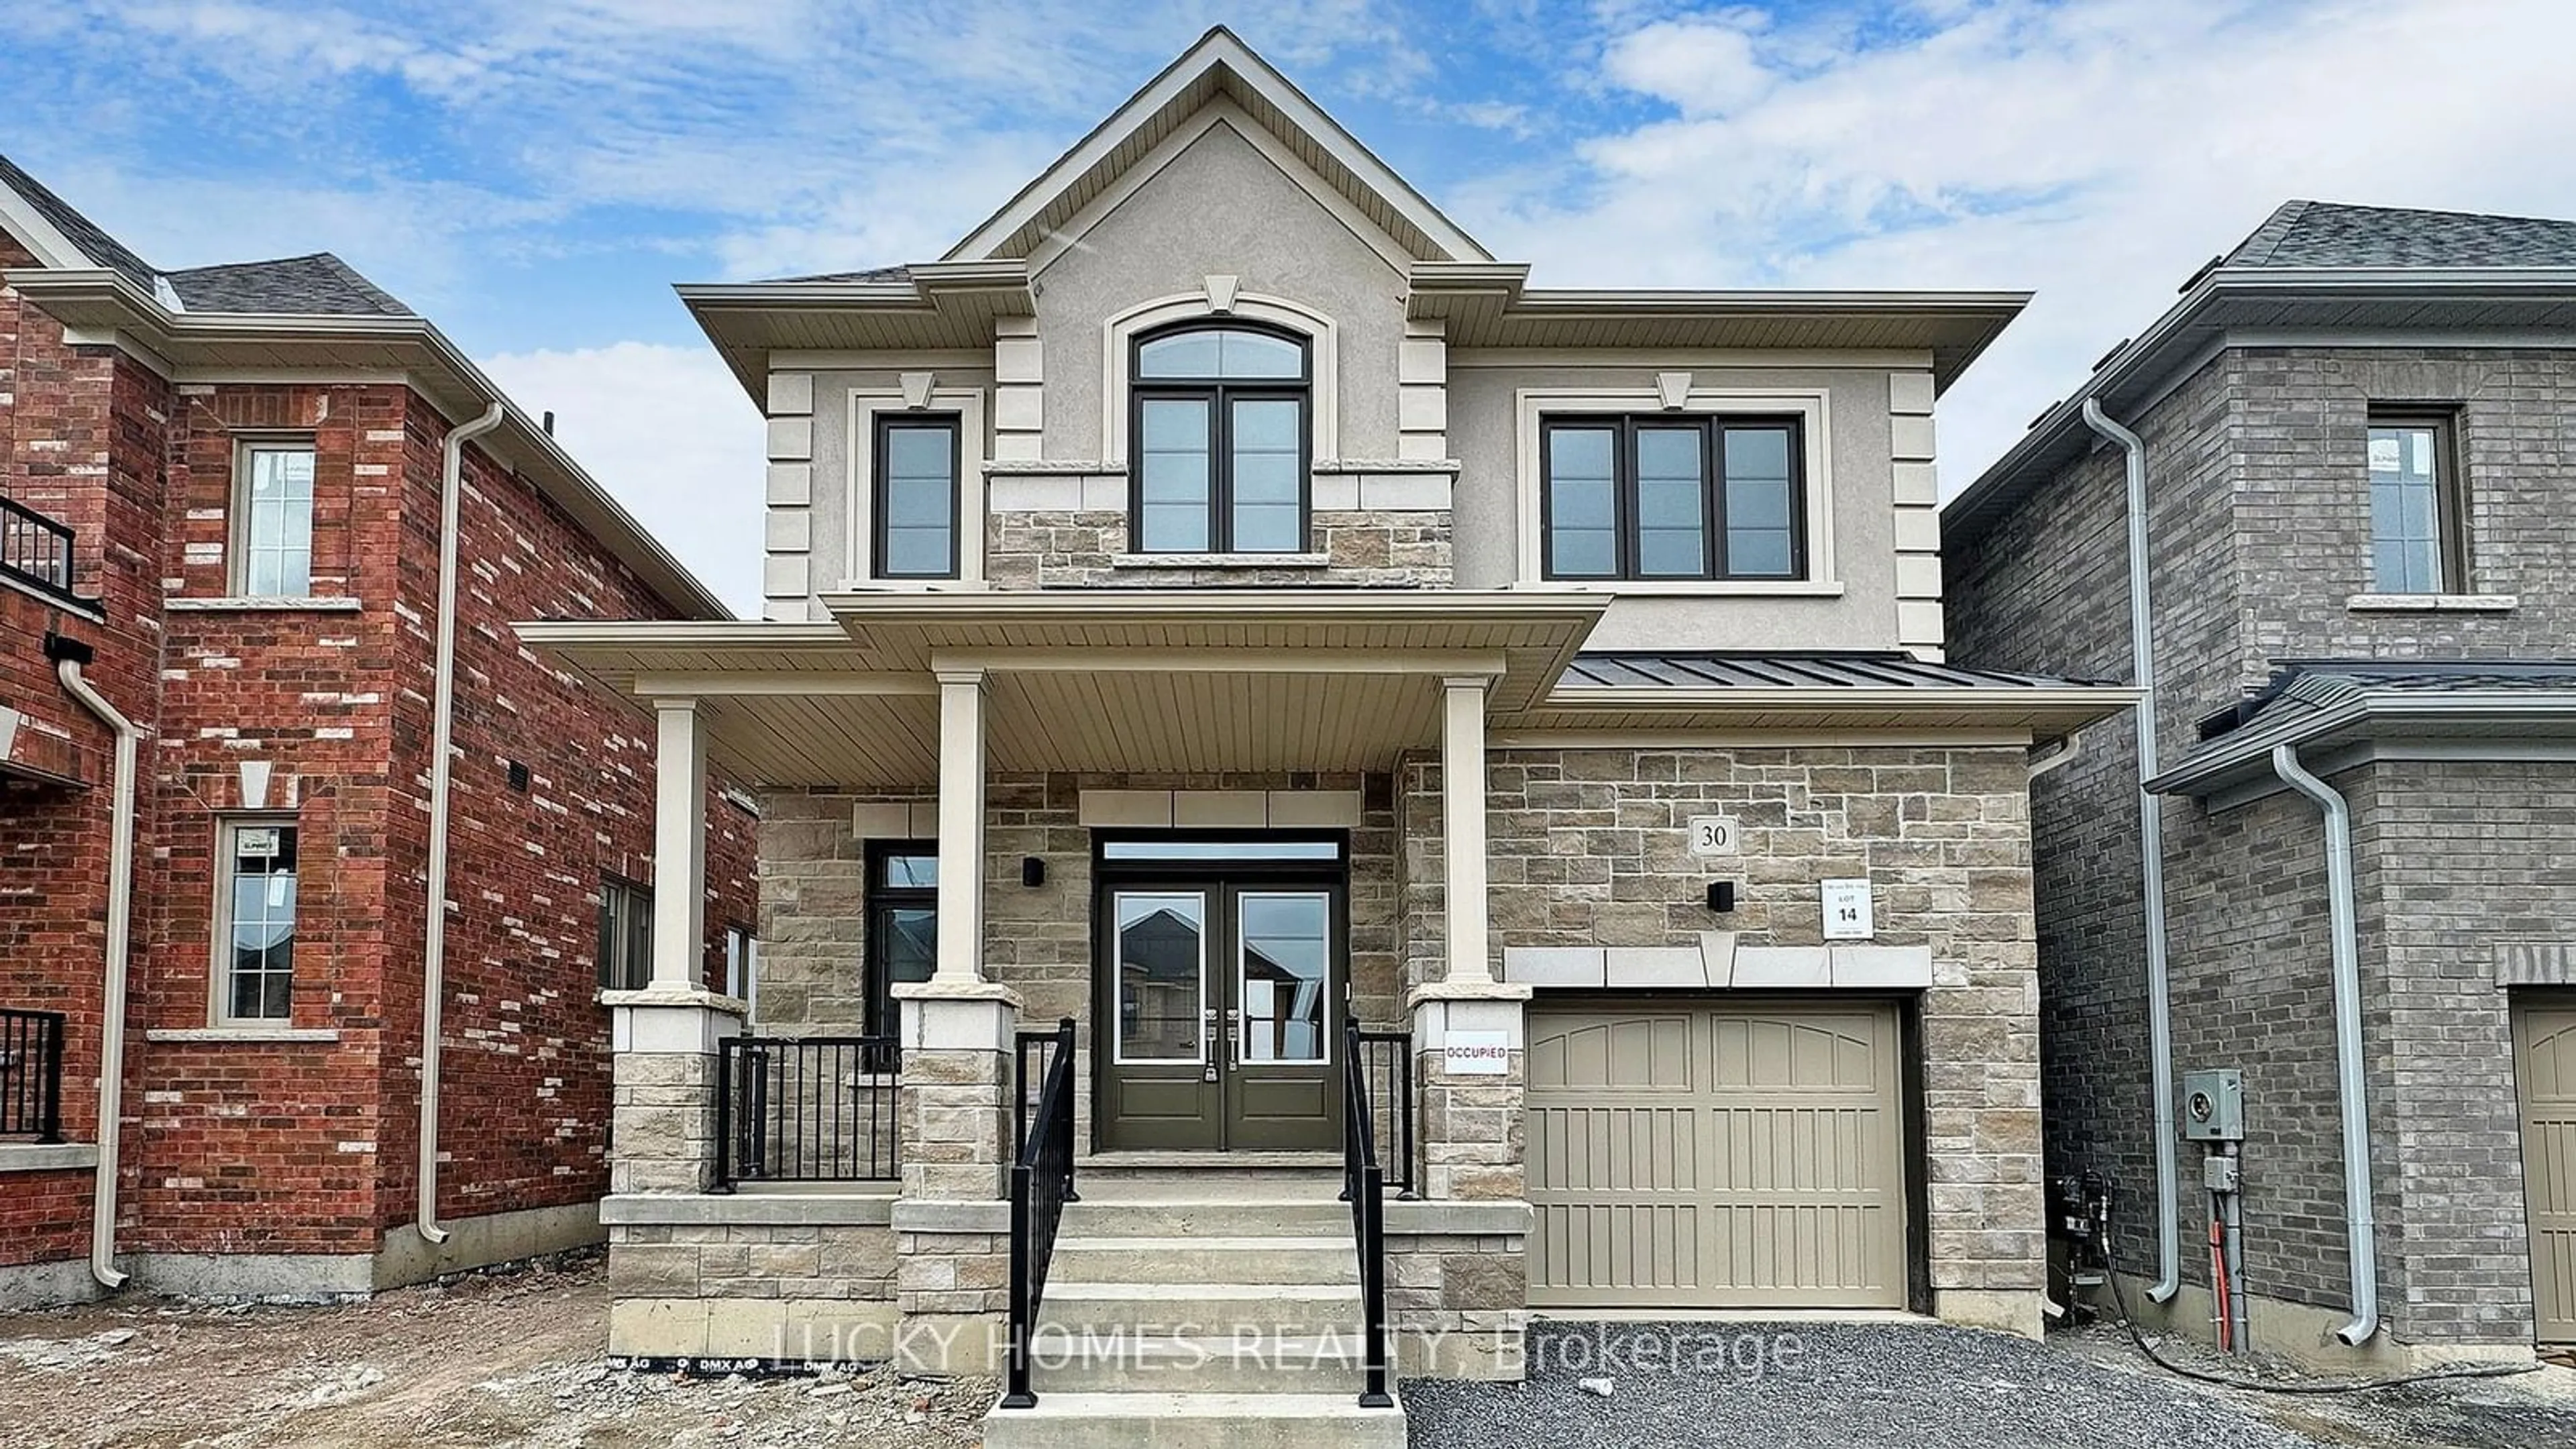 Home with brick exterior material for 30 Ed Ewert Ave, Clarington Ontario L1B 0W9